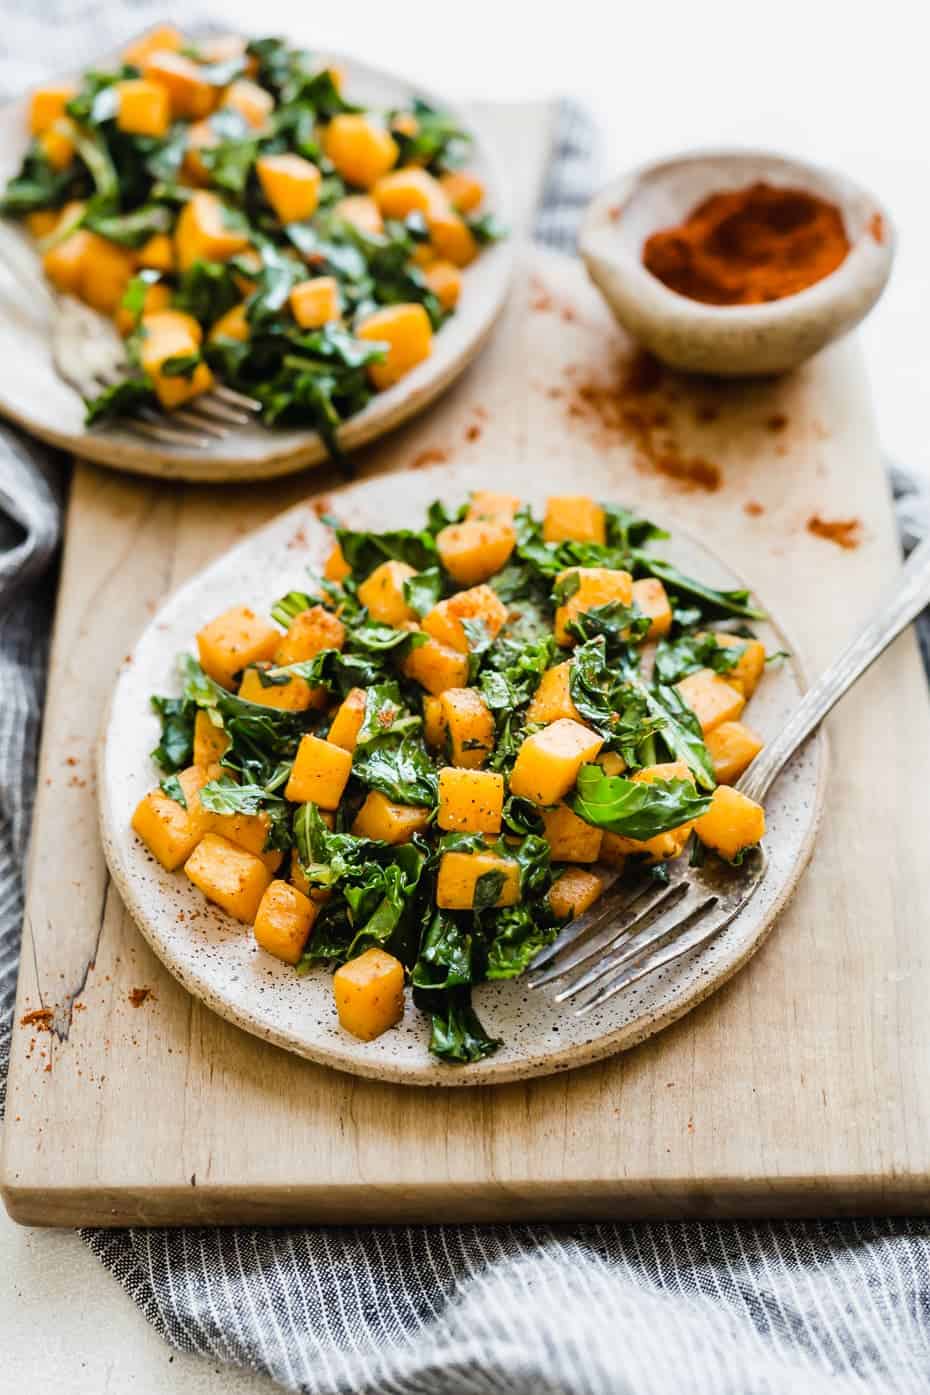 Butternut squash and kale on a plate that's sitting on a wooden cutting board.